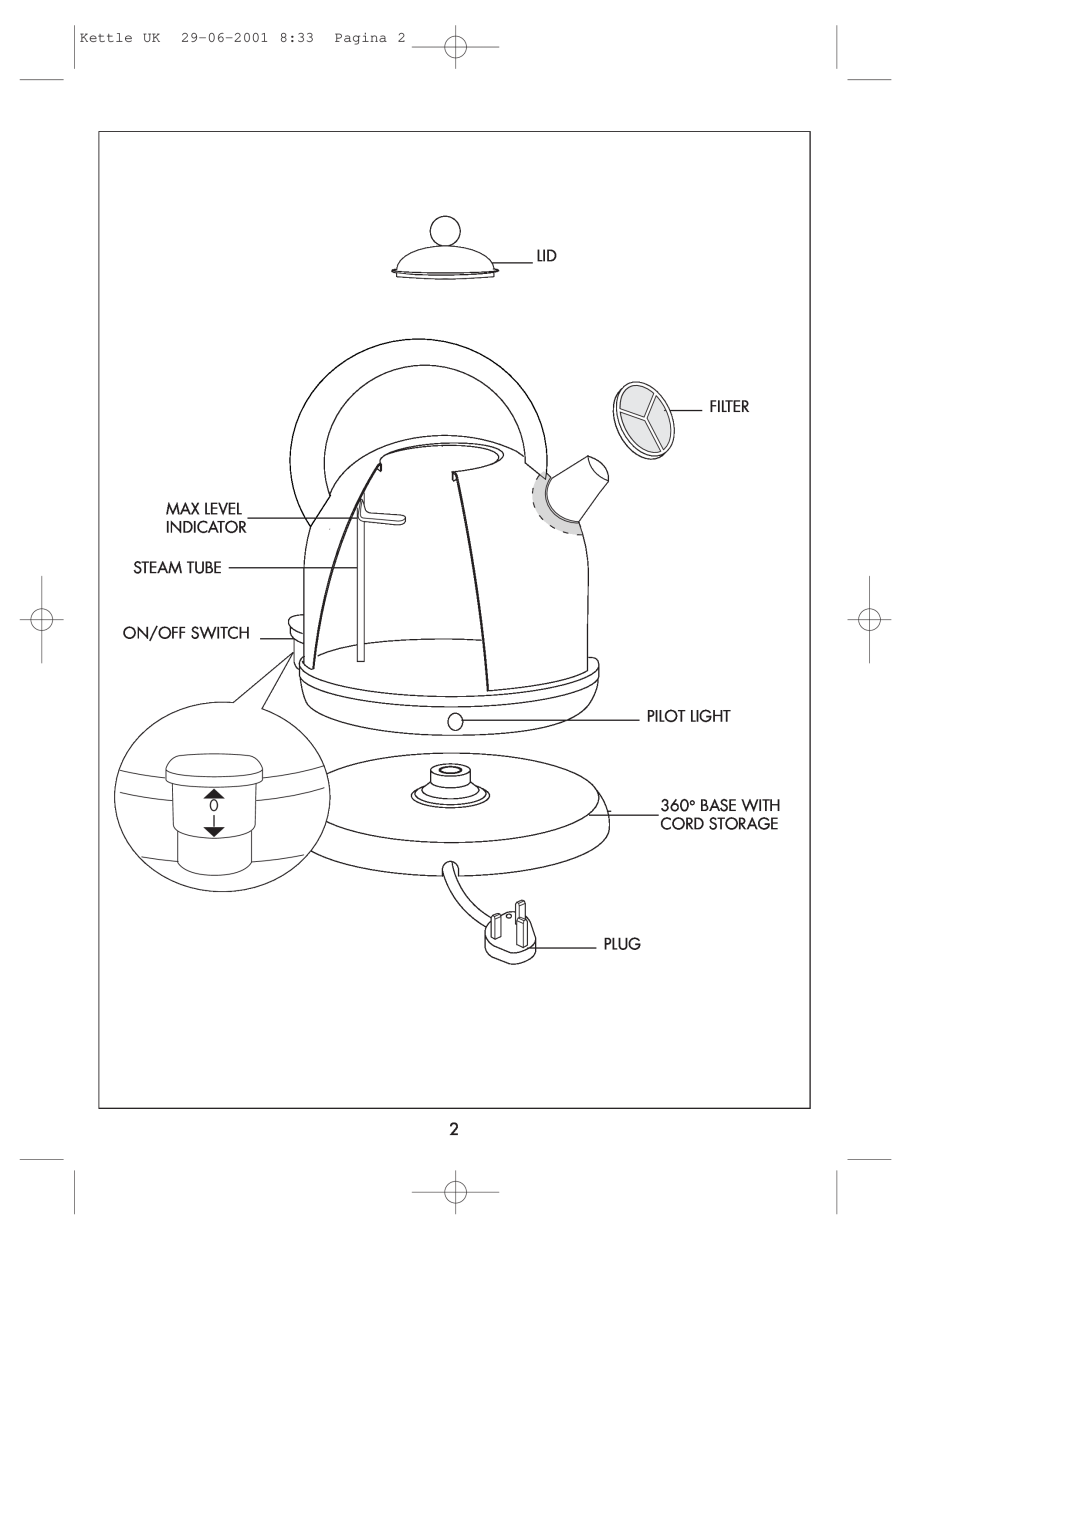 DeLonghi manual Kettle UK 29-06-2001 833 Pagina, Max Level Indicator Steam Tube On/Off Switch 